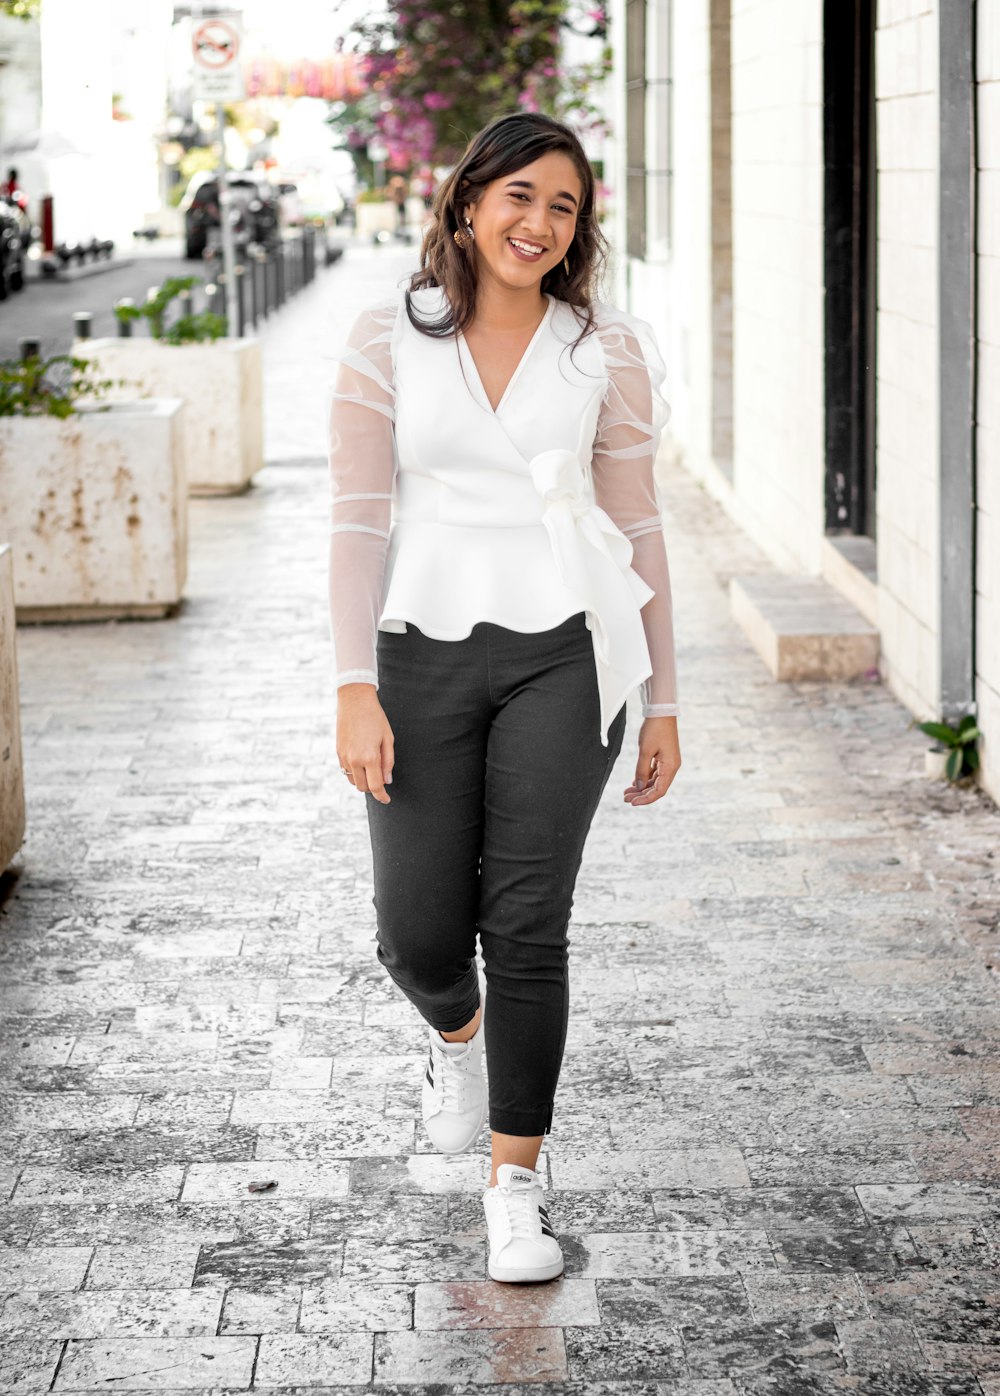 Woman in white shirt and black pants standing on sidewalk during daytime  photo – Free Brown Image on Unsplash